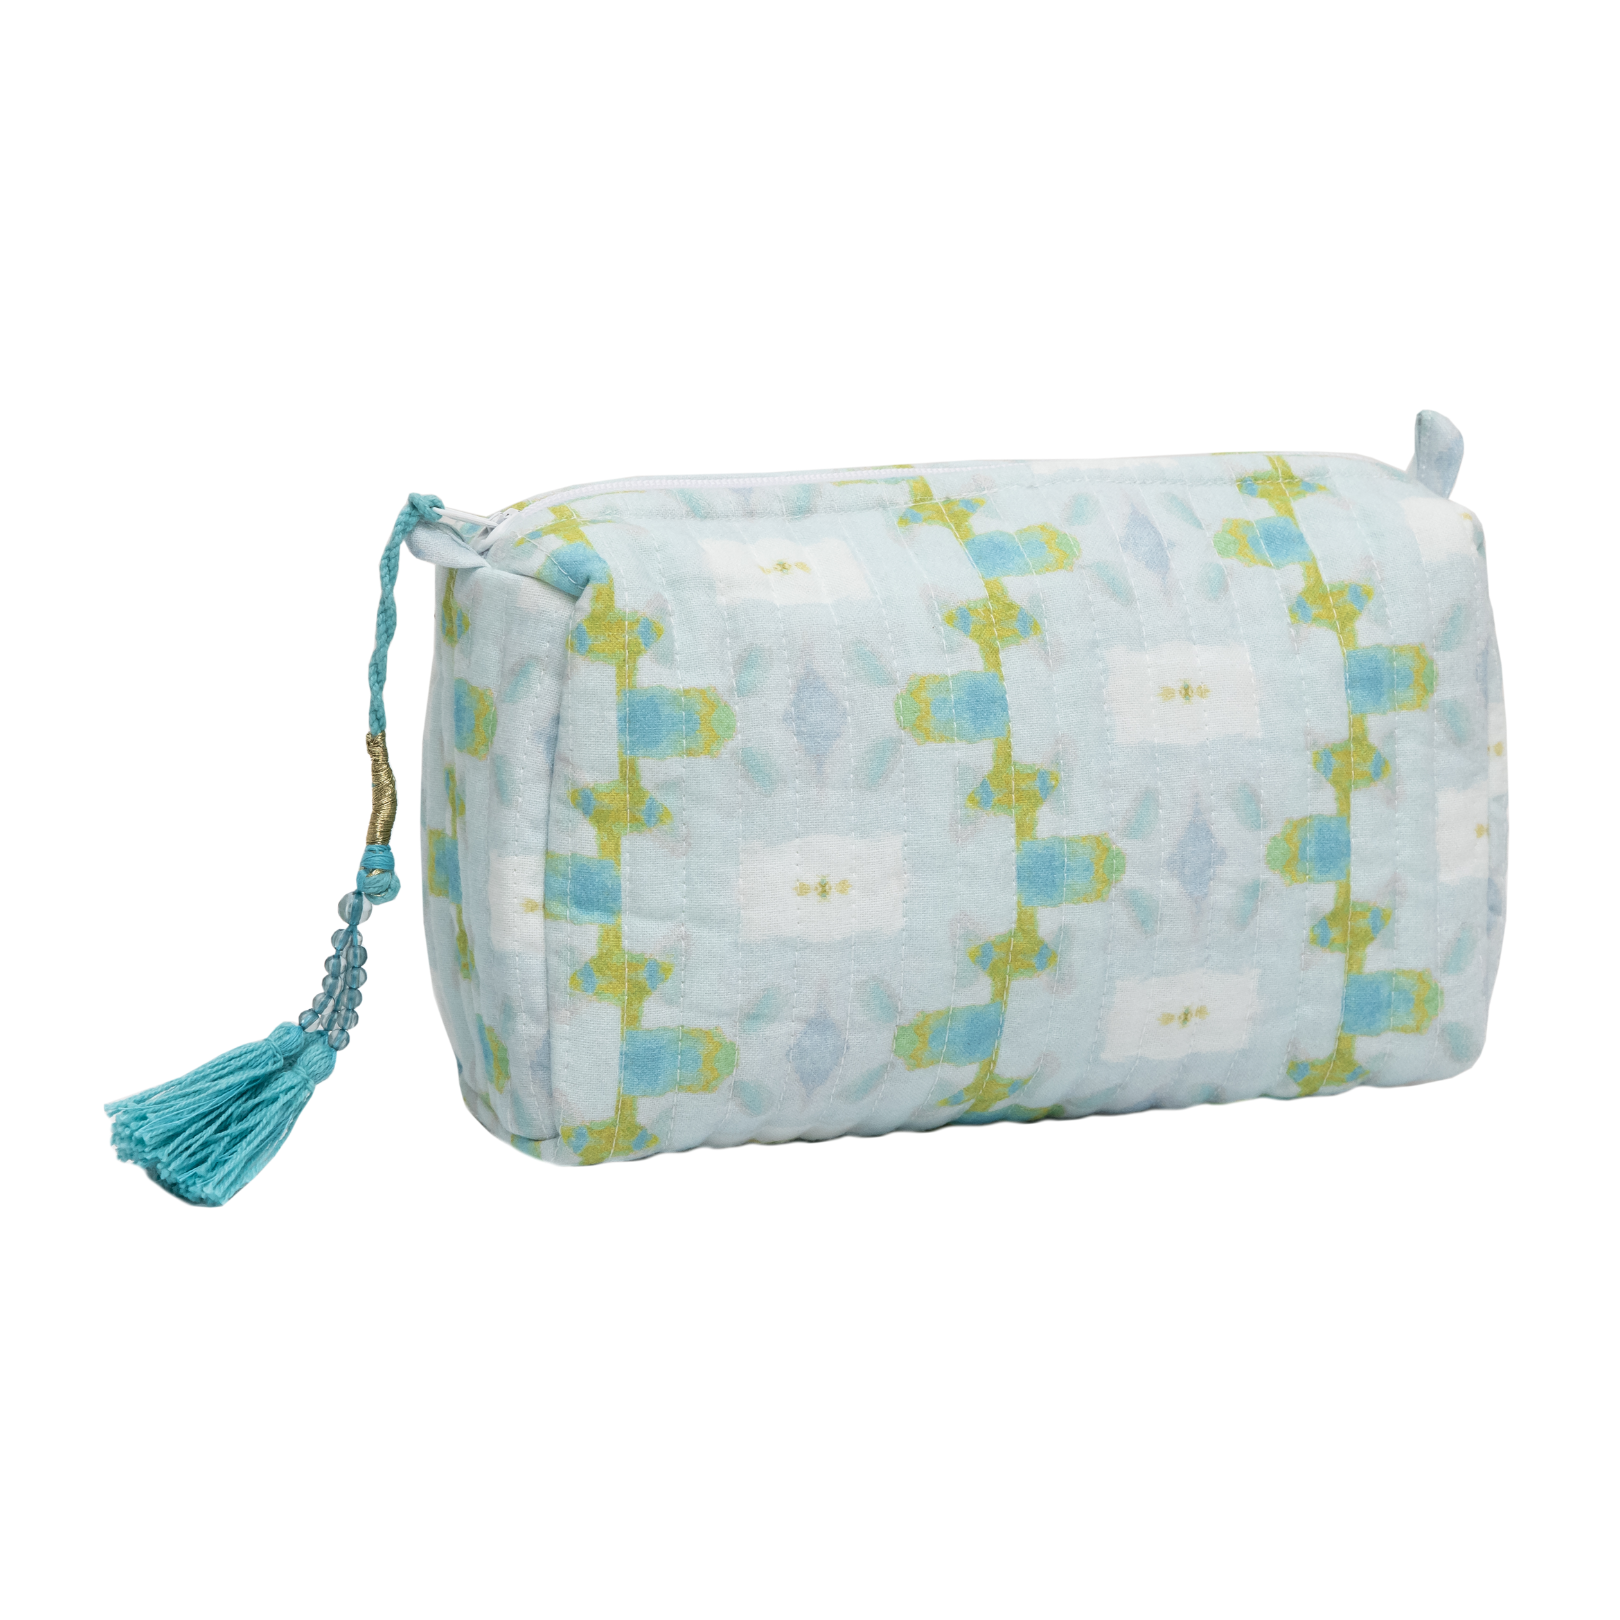 Chloe Blue Small Cosmetic Bag Misc Accessories Laura Park Designs   